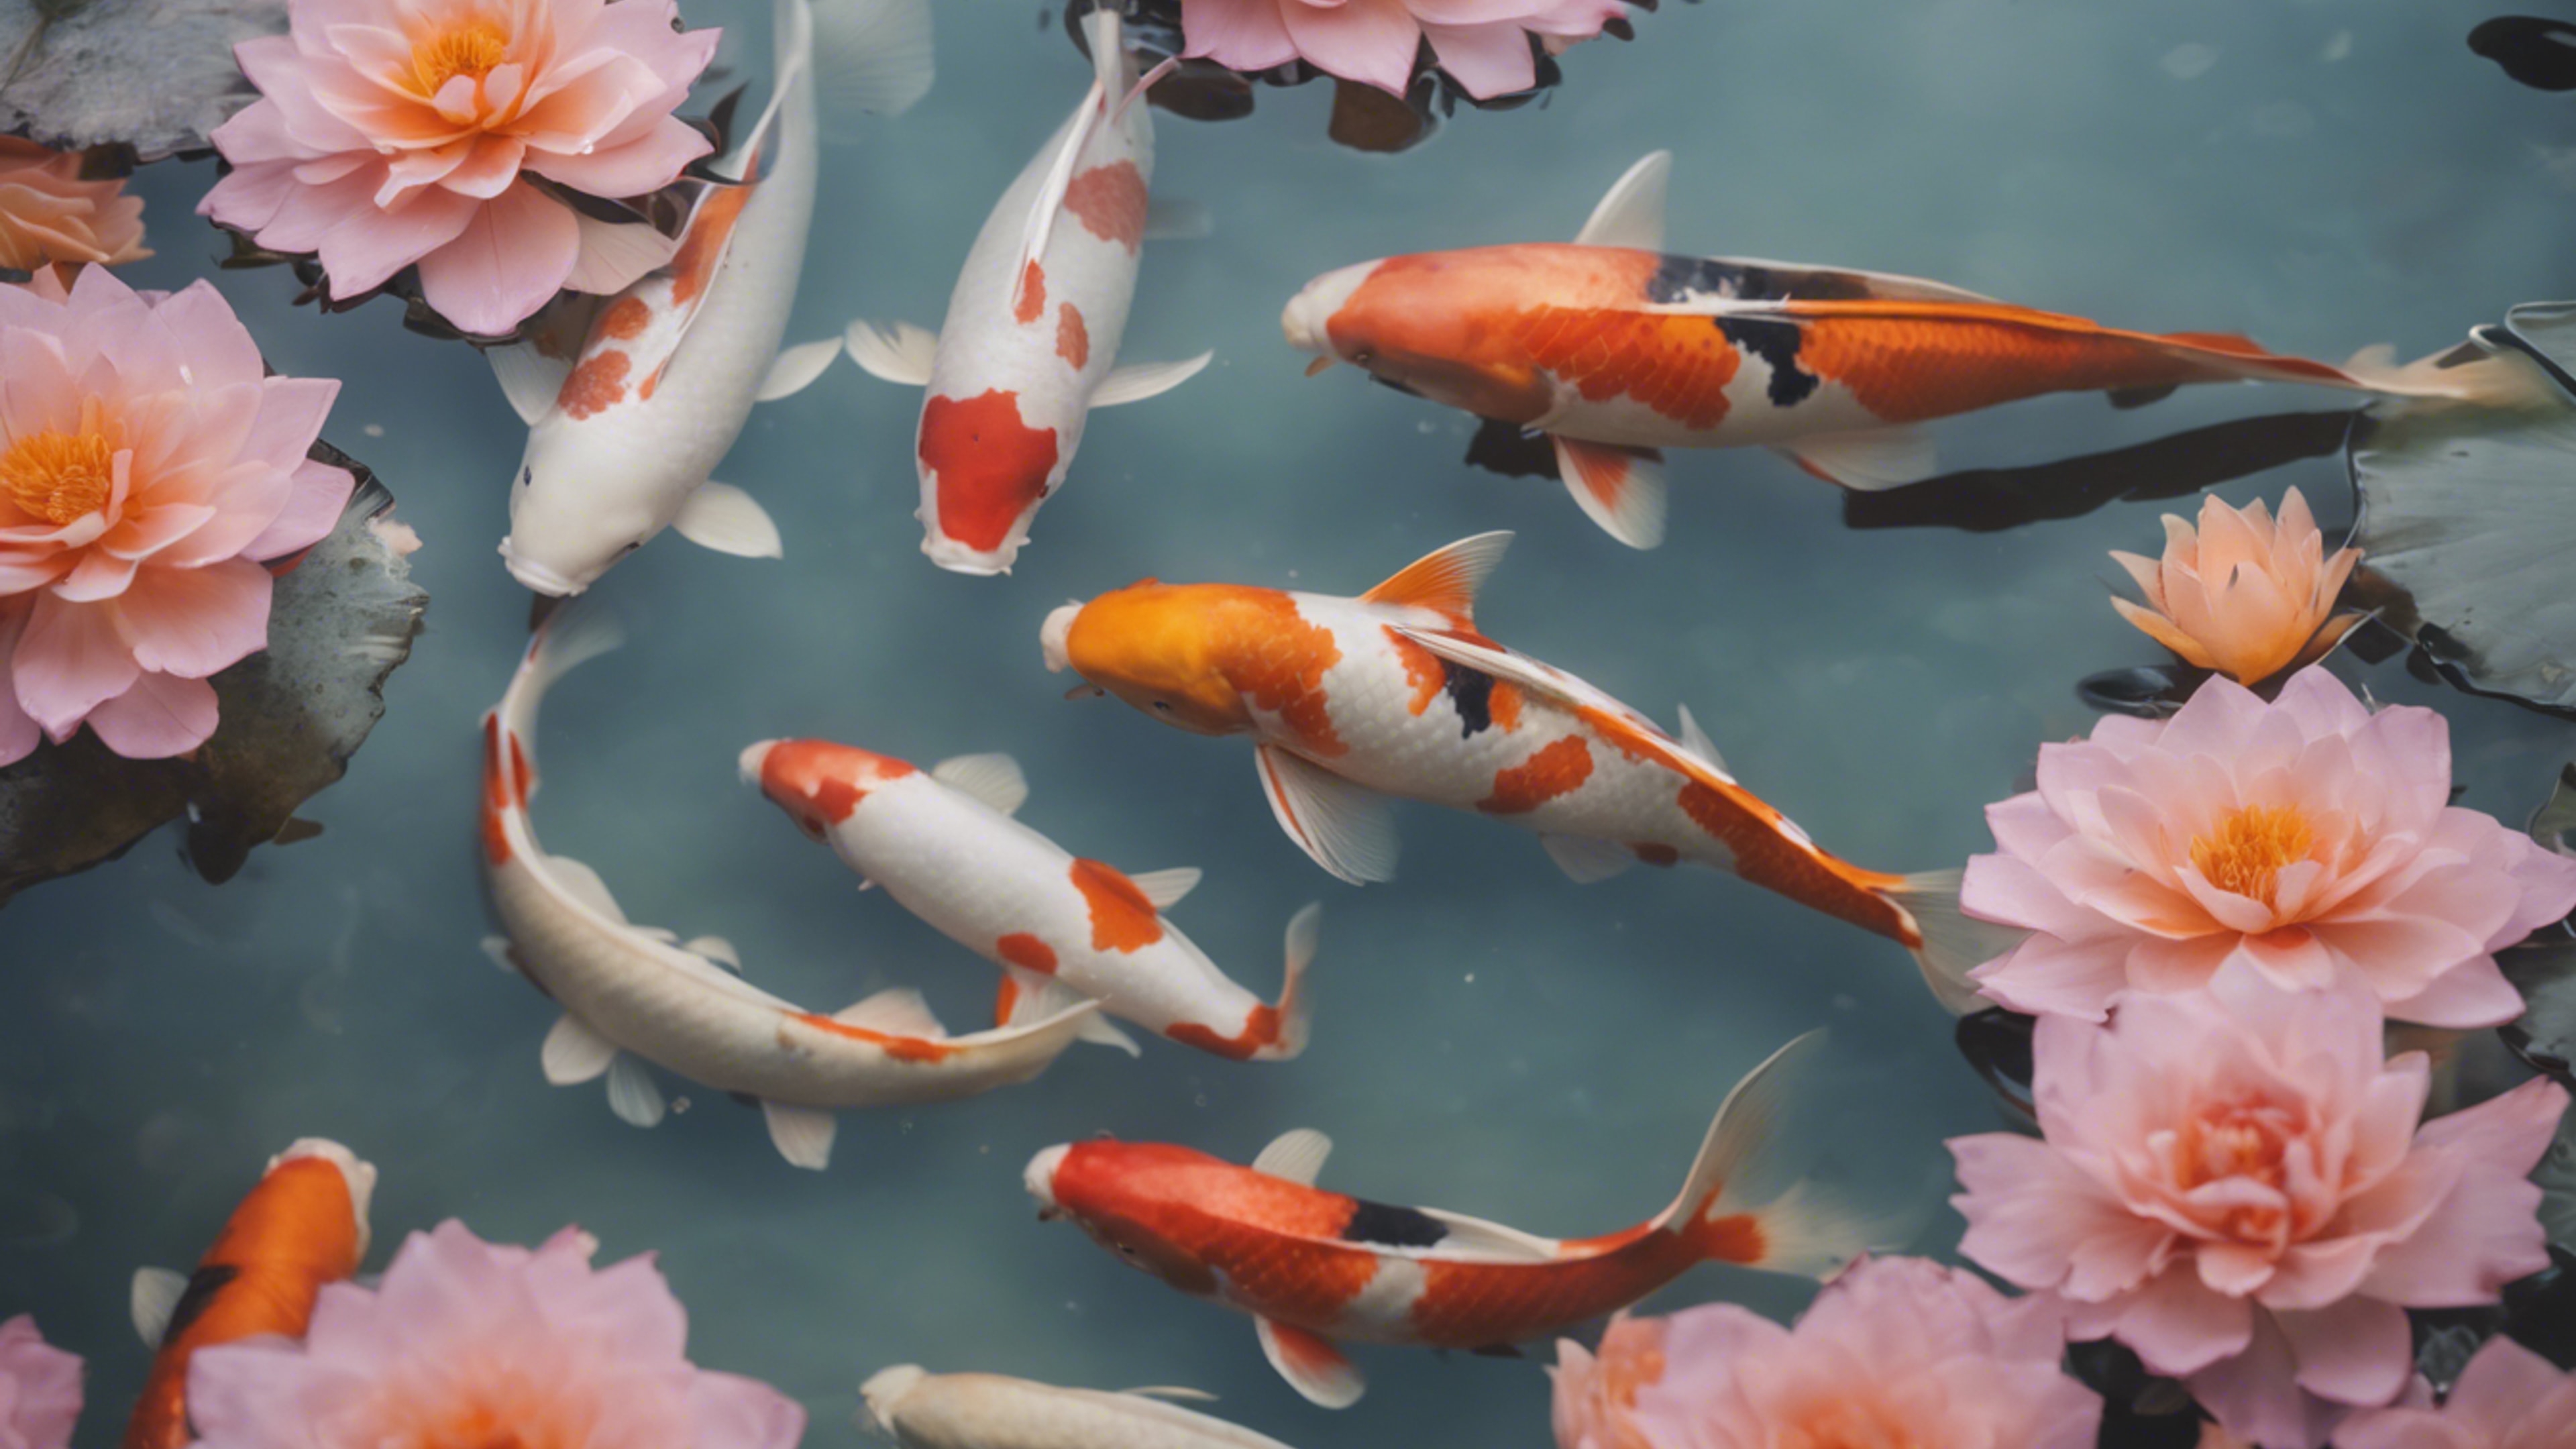 A garden scene featuring tranquil koi fishes in a cool pastel color pond. Tapet[188bf594936145059e7f]